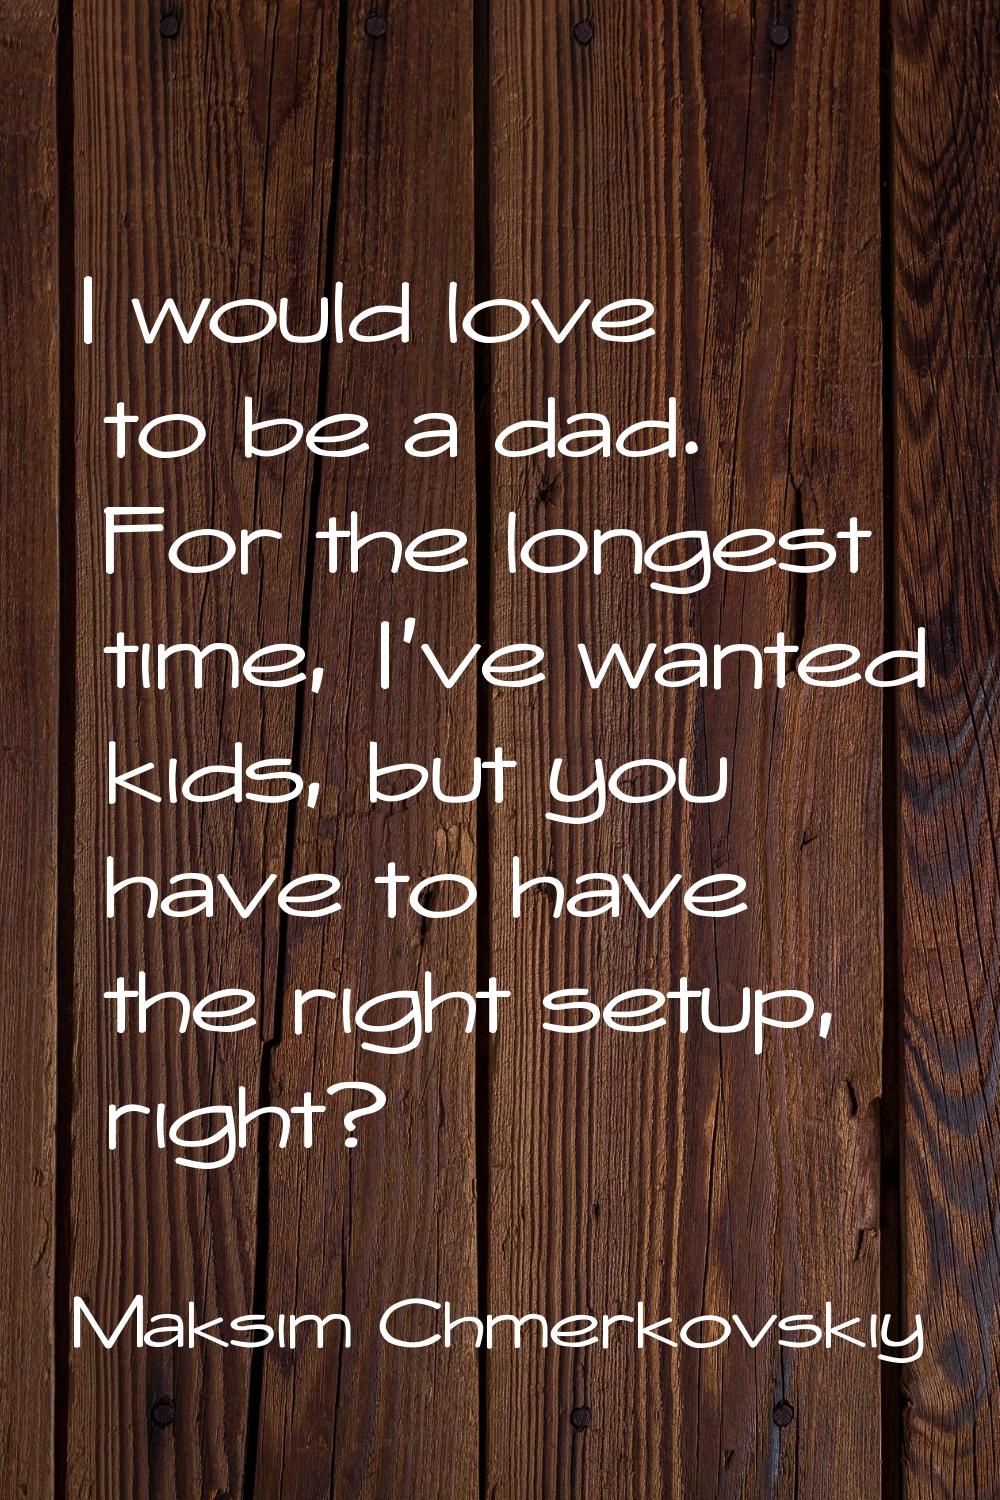 I would love to be a dad. For the longest time, I've wanted kids, but you have to have the right se